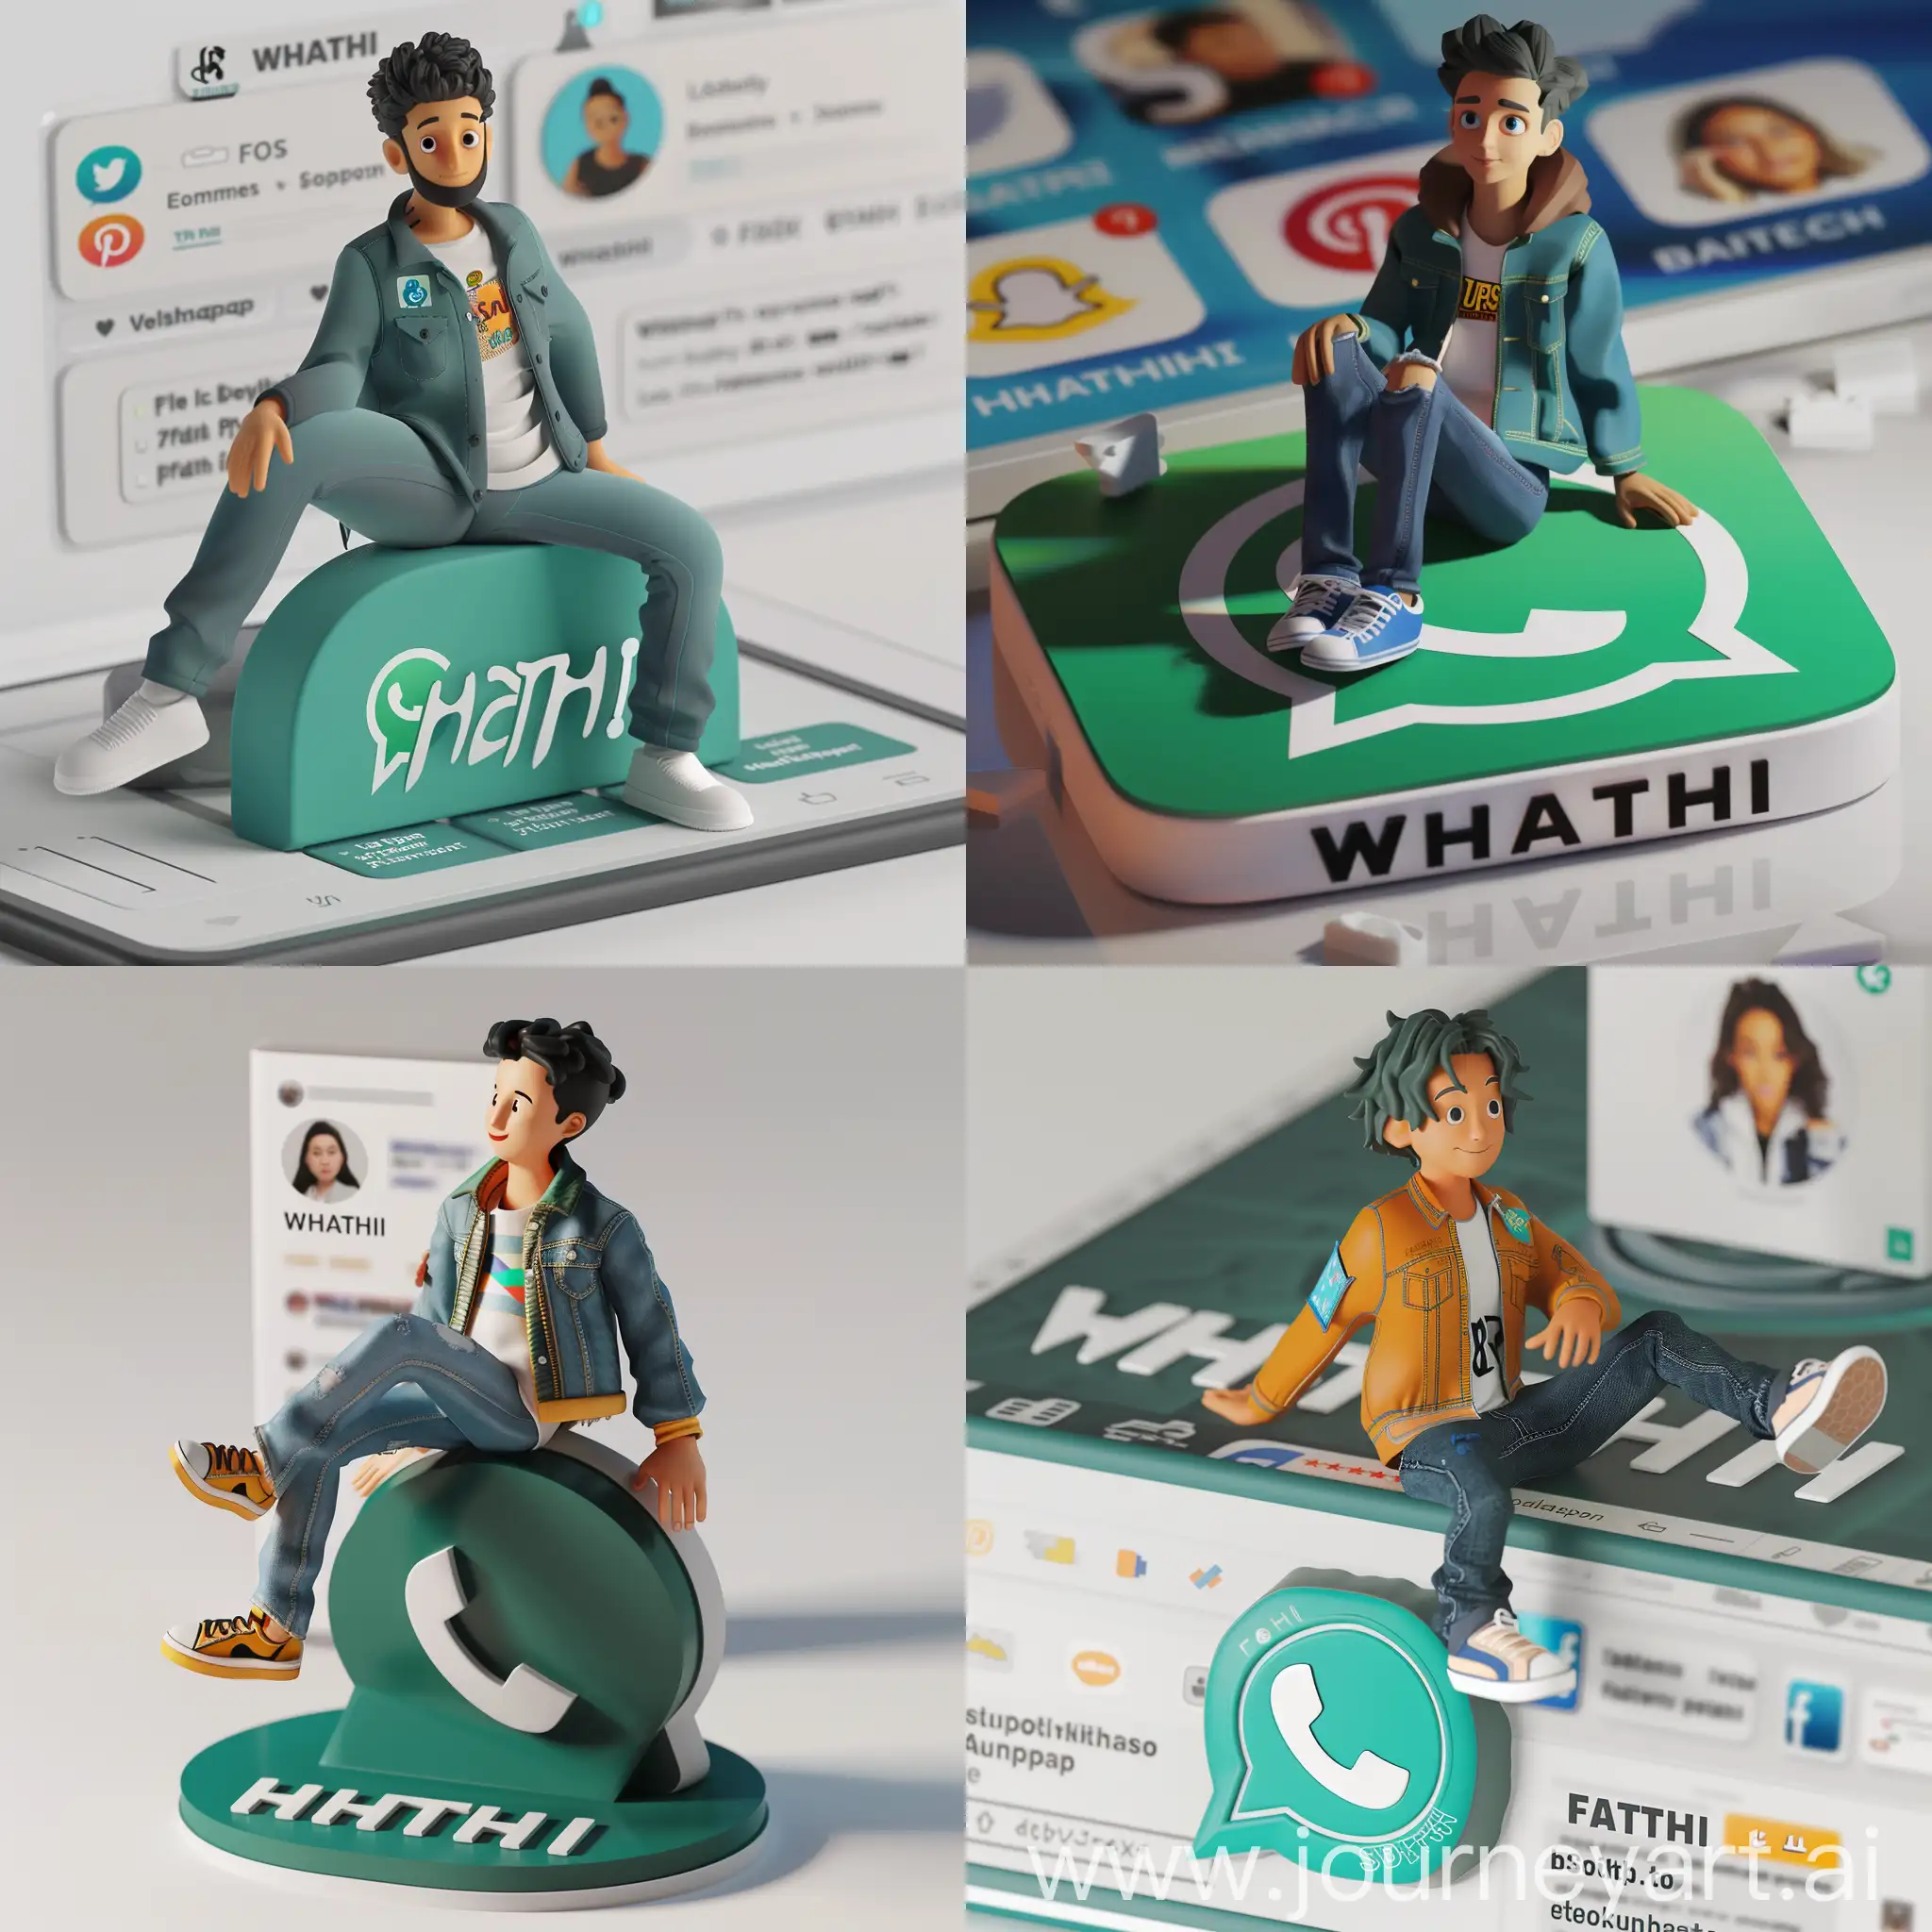 Create a 3D illustration of an animated character sitting casually on top of a social media logo "WHATSAPP". The character must wear casual modern clothing such as jeans jacket and sneakers shoes. The background of the image is a social media profile page with a user name "FATEHI" and a profile picture that match.